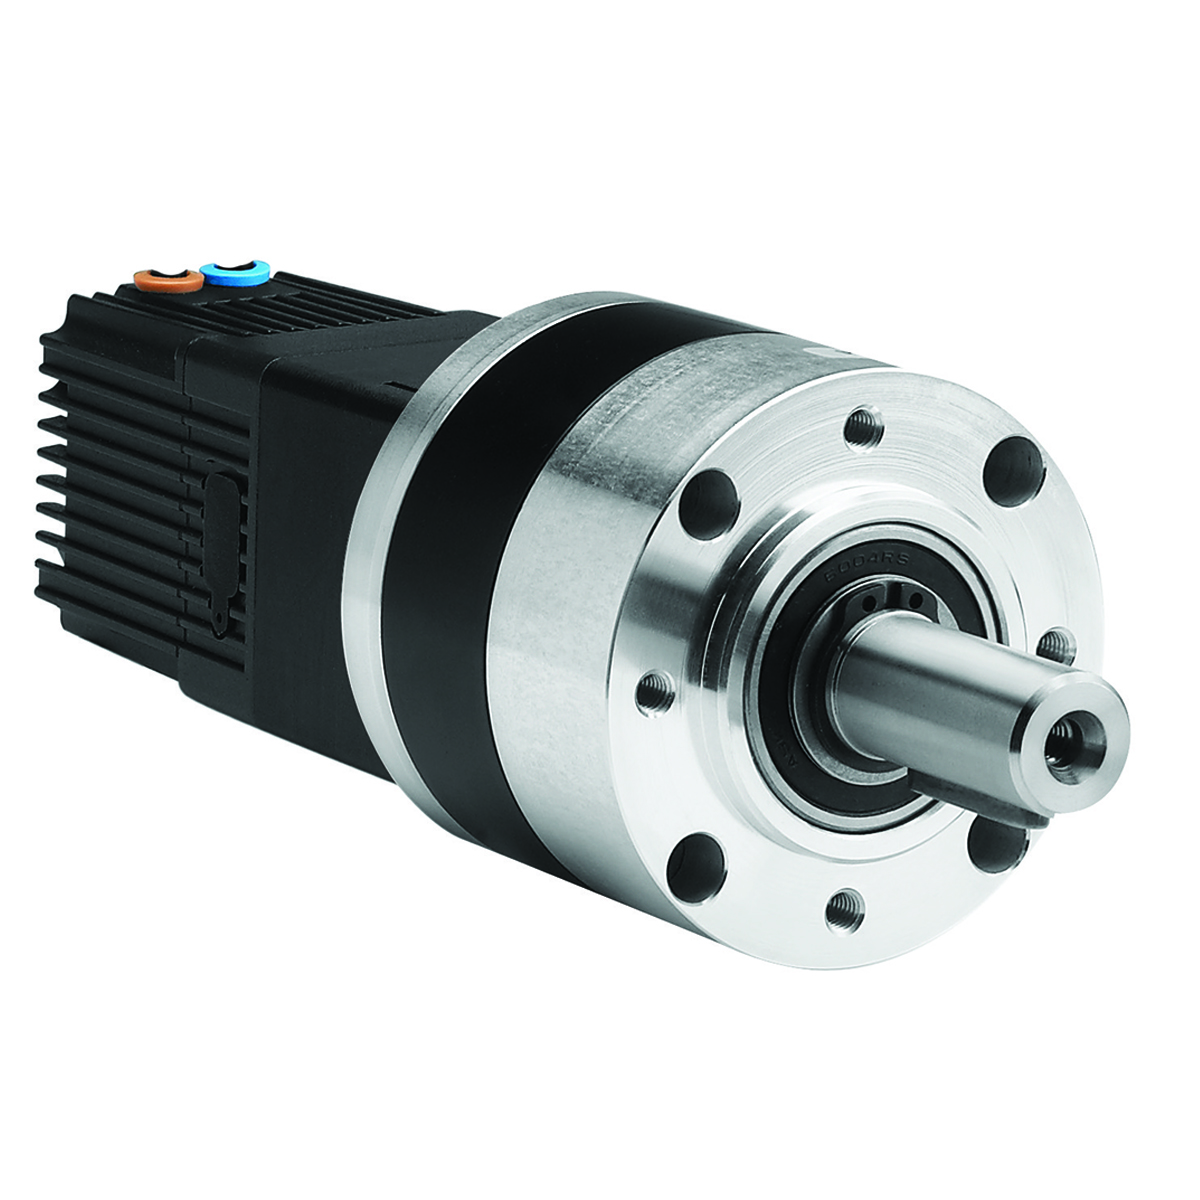 SQ57 Motor 150W 12-32Vdc + Drive TNi21 PWM + Gearbox P81 - 2 stages ratio 26.85-1